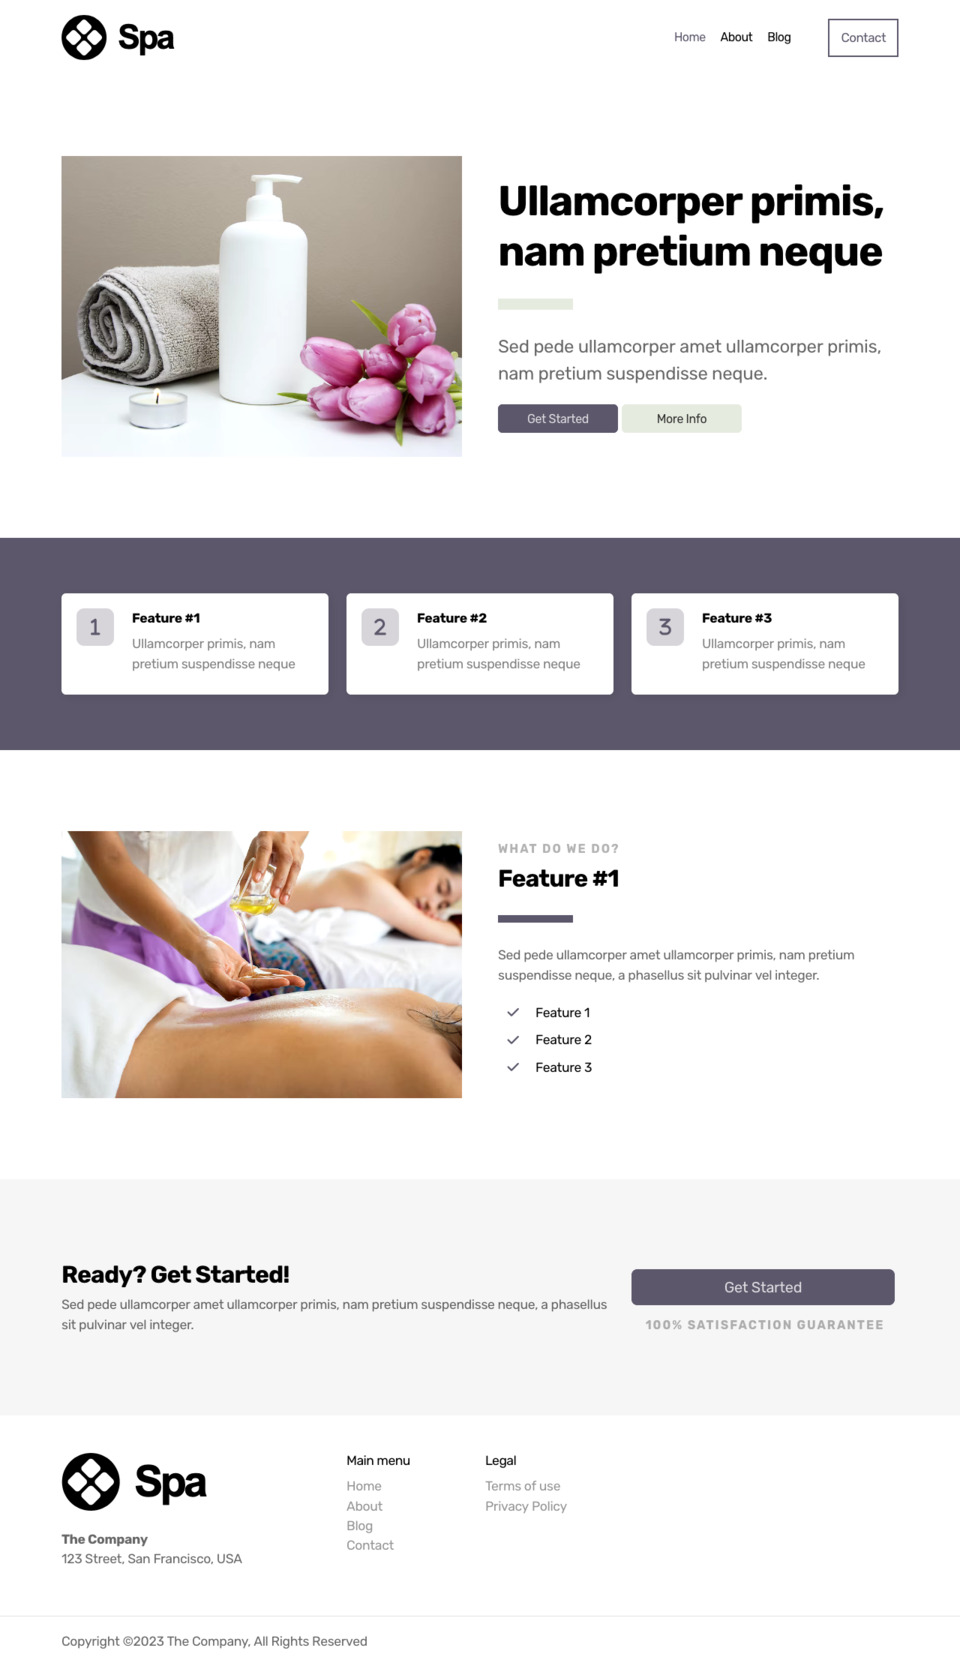 Spa Website Template - Perfect for spa businesses, beauty salons, wellness centers, massage therapists, and any business looking for a luxurious and professional online presence.